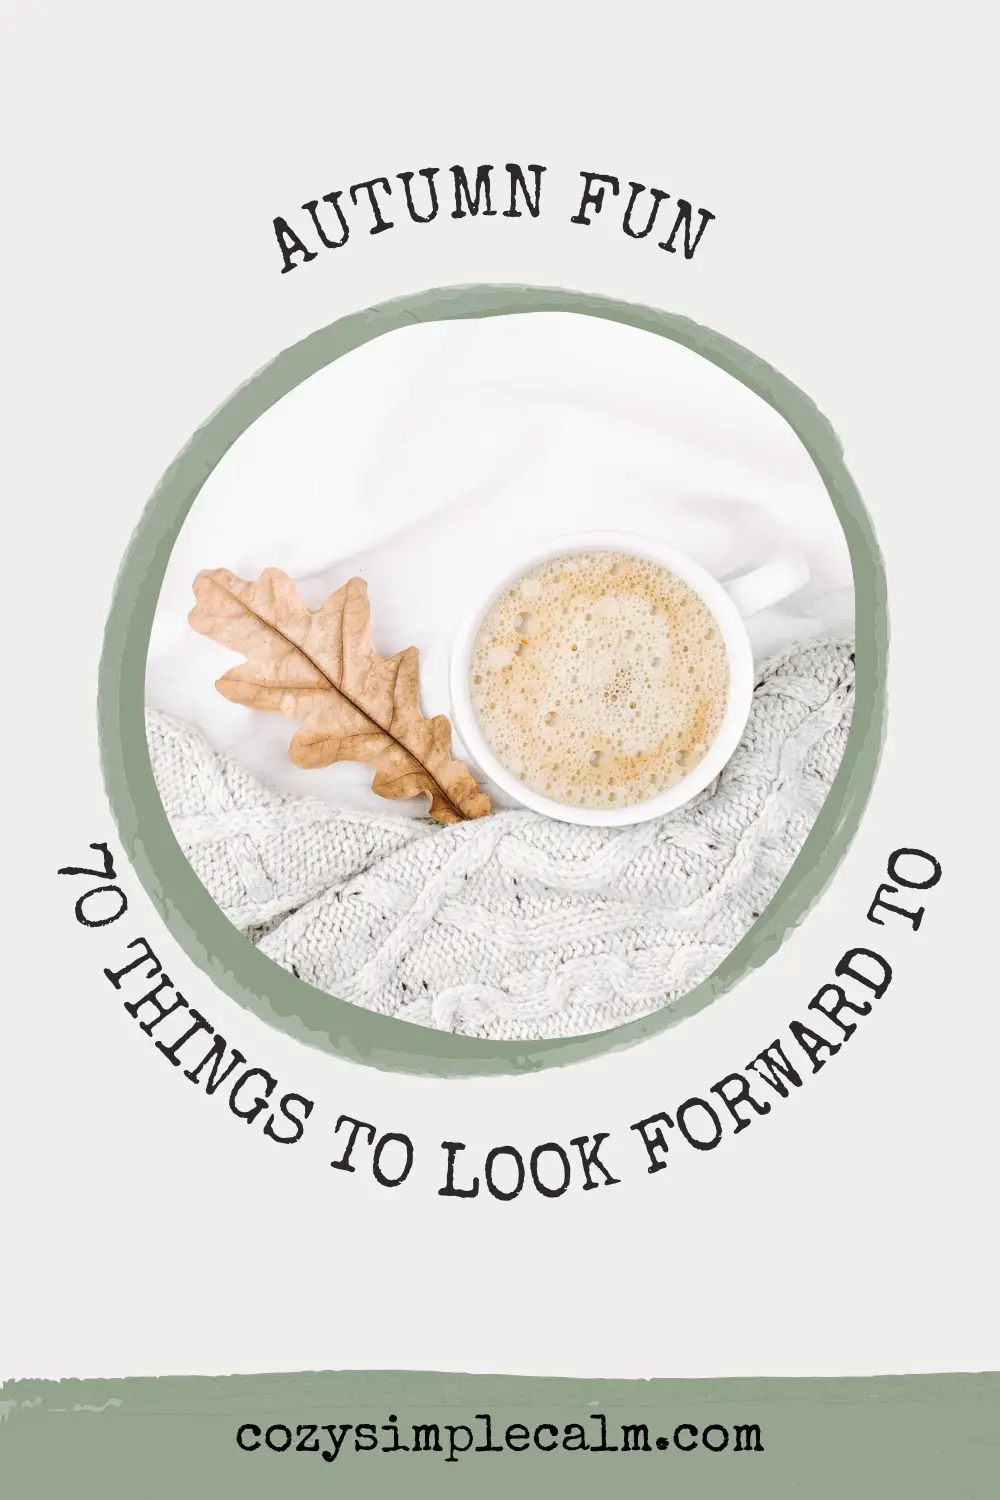 Overhead image of coffee mug next to brown autumn leaf and grey sweater - Text overlay: Autumn Fun: 70 things to look forward to - cozysimplecalm.com